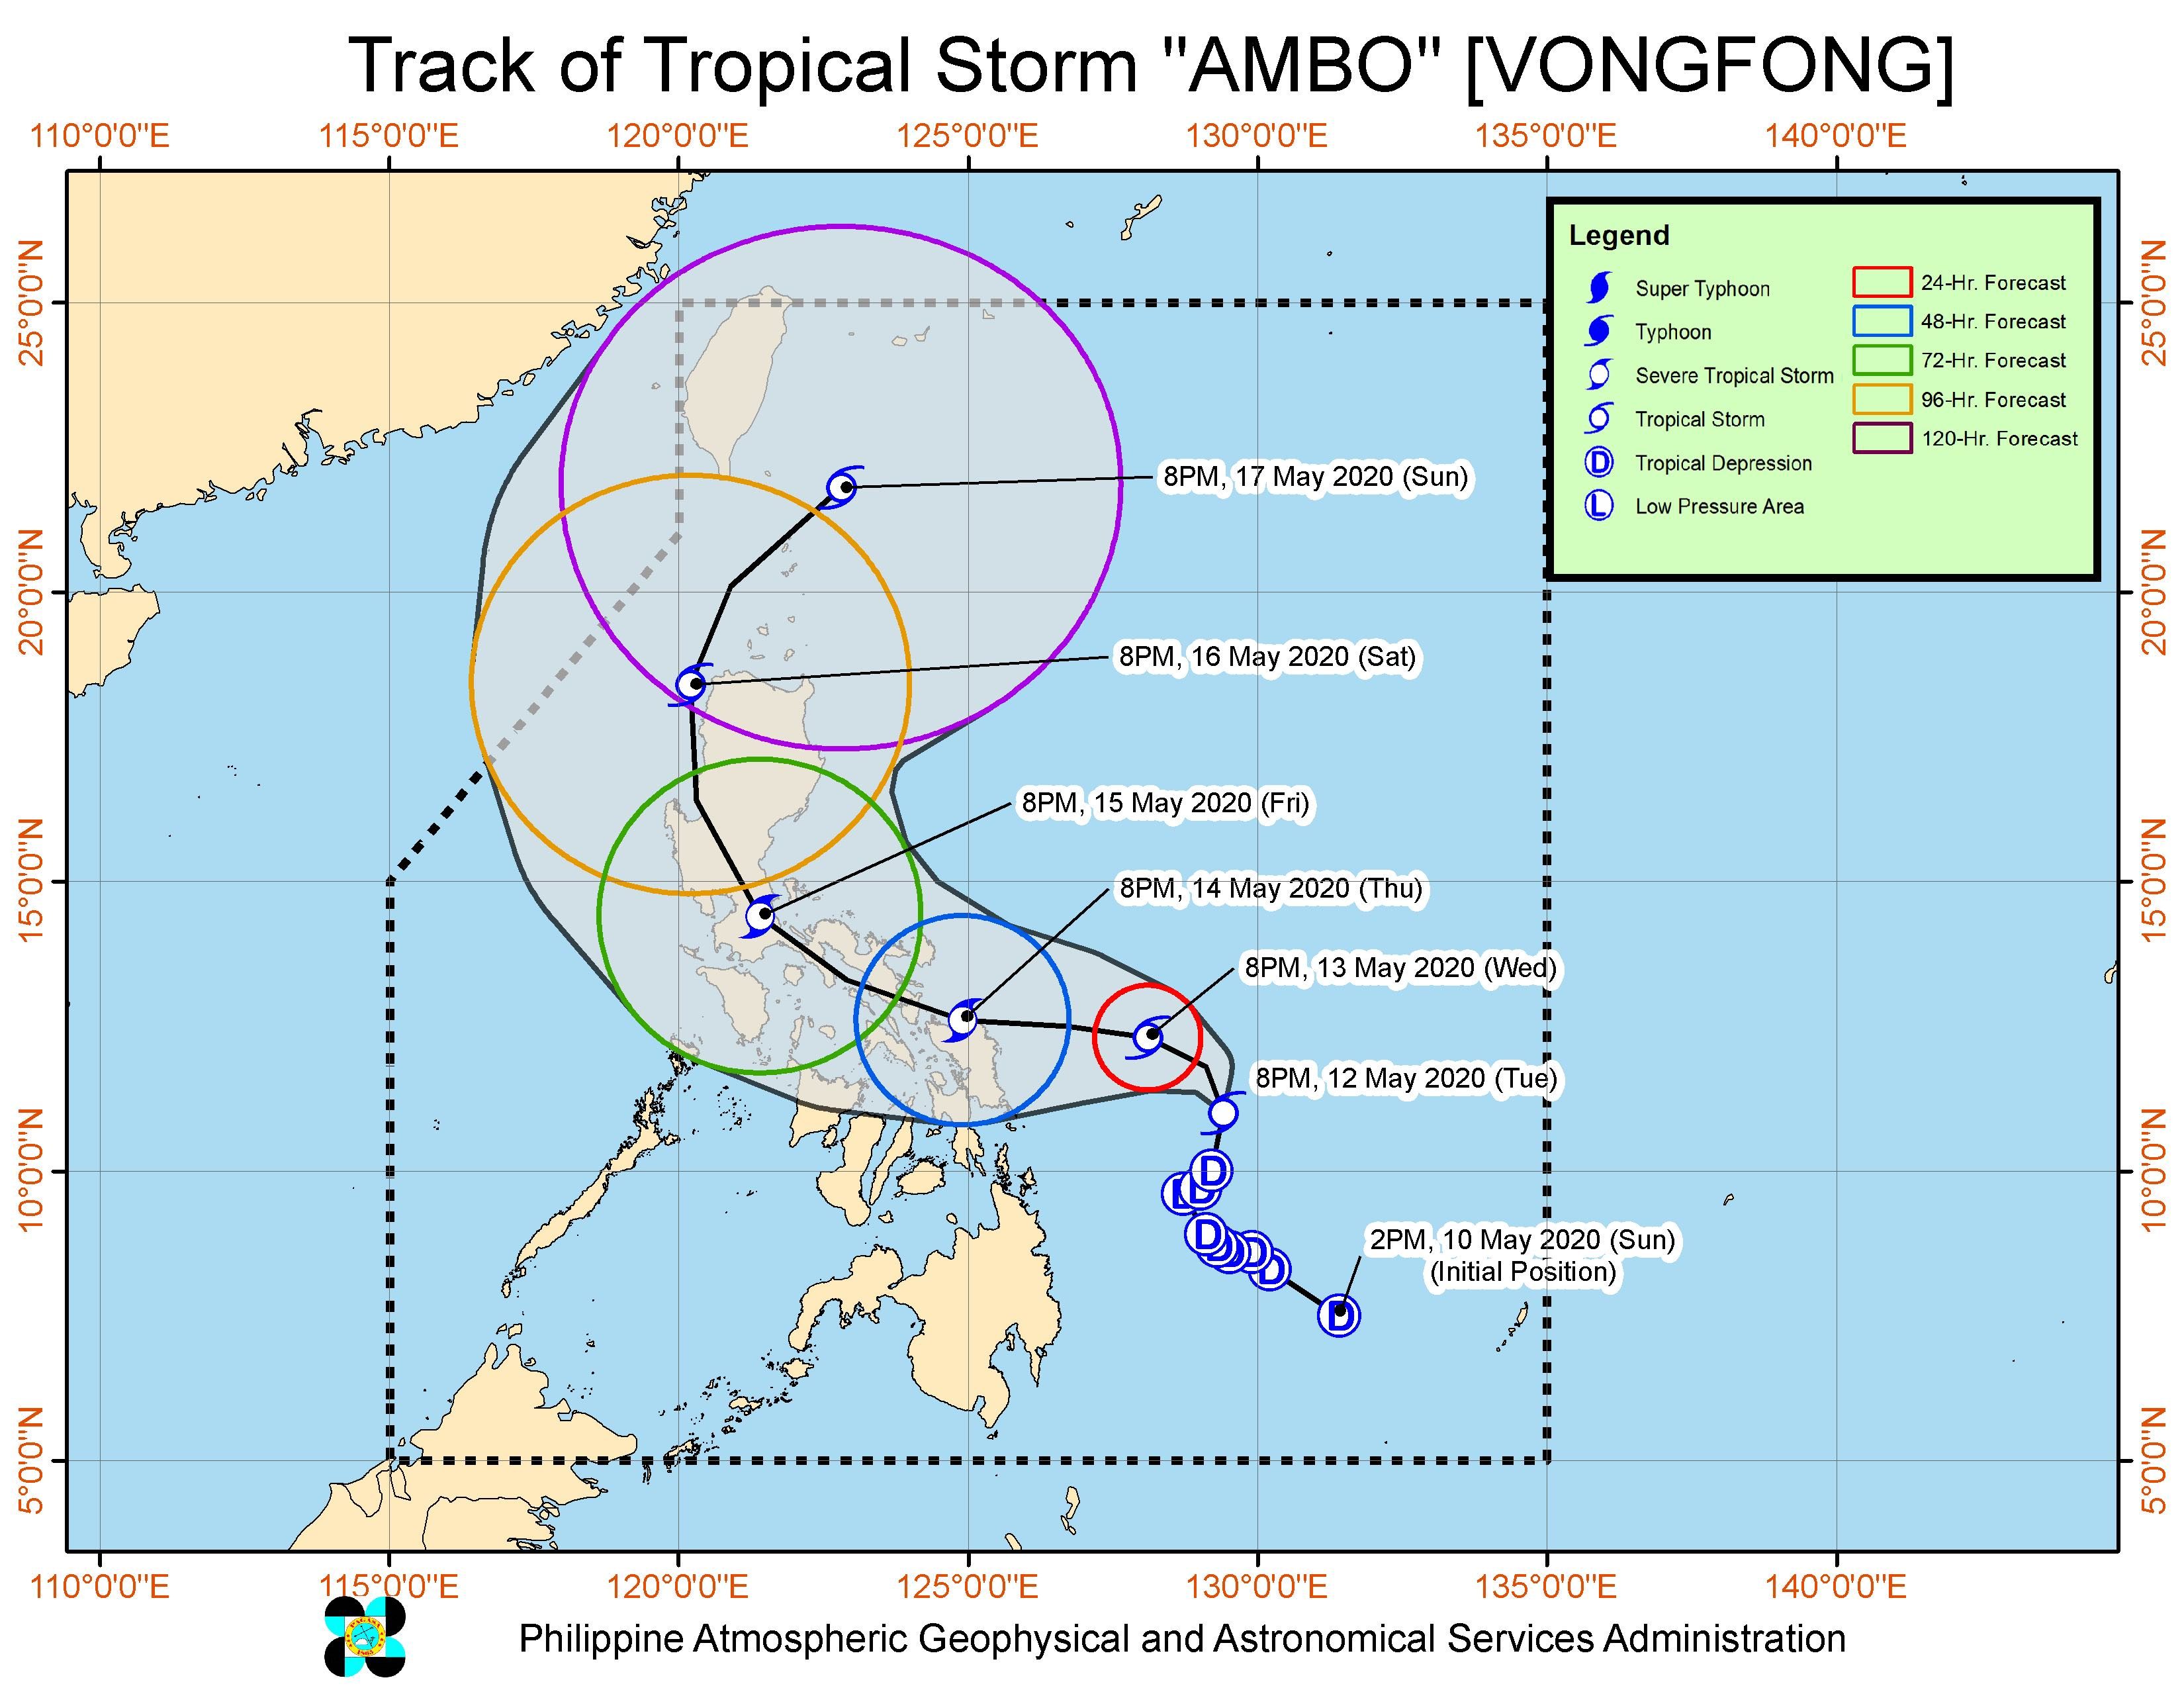 Forecast track of Tropical Storm Ambo (Vongfong) as of May 12, 2020, 11 pm. Image from PAGASA 